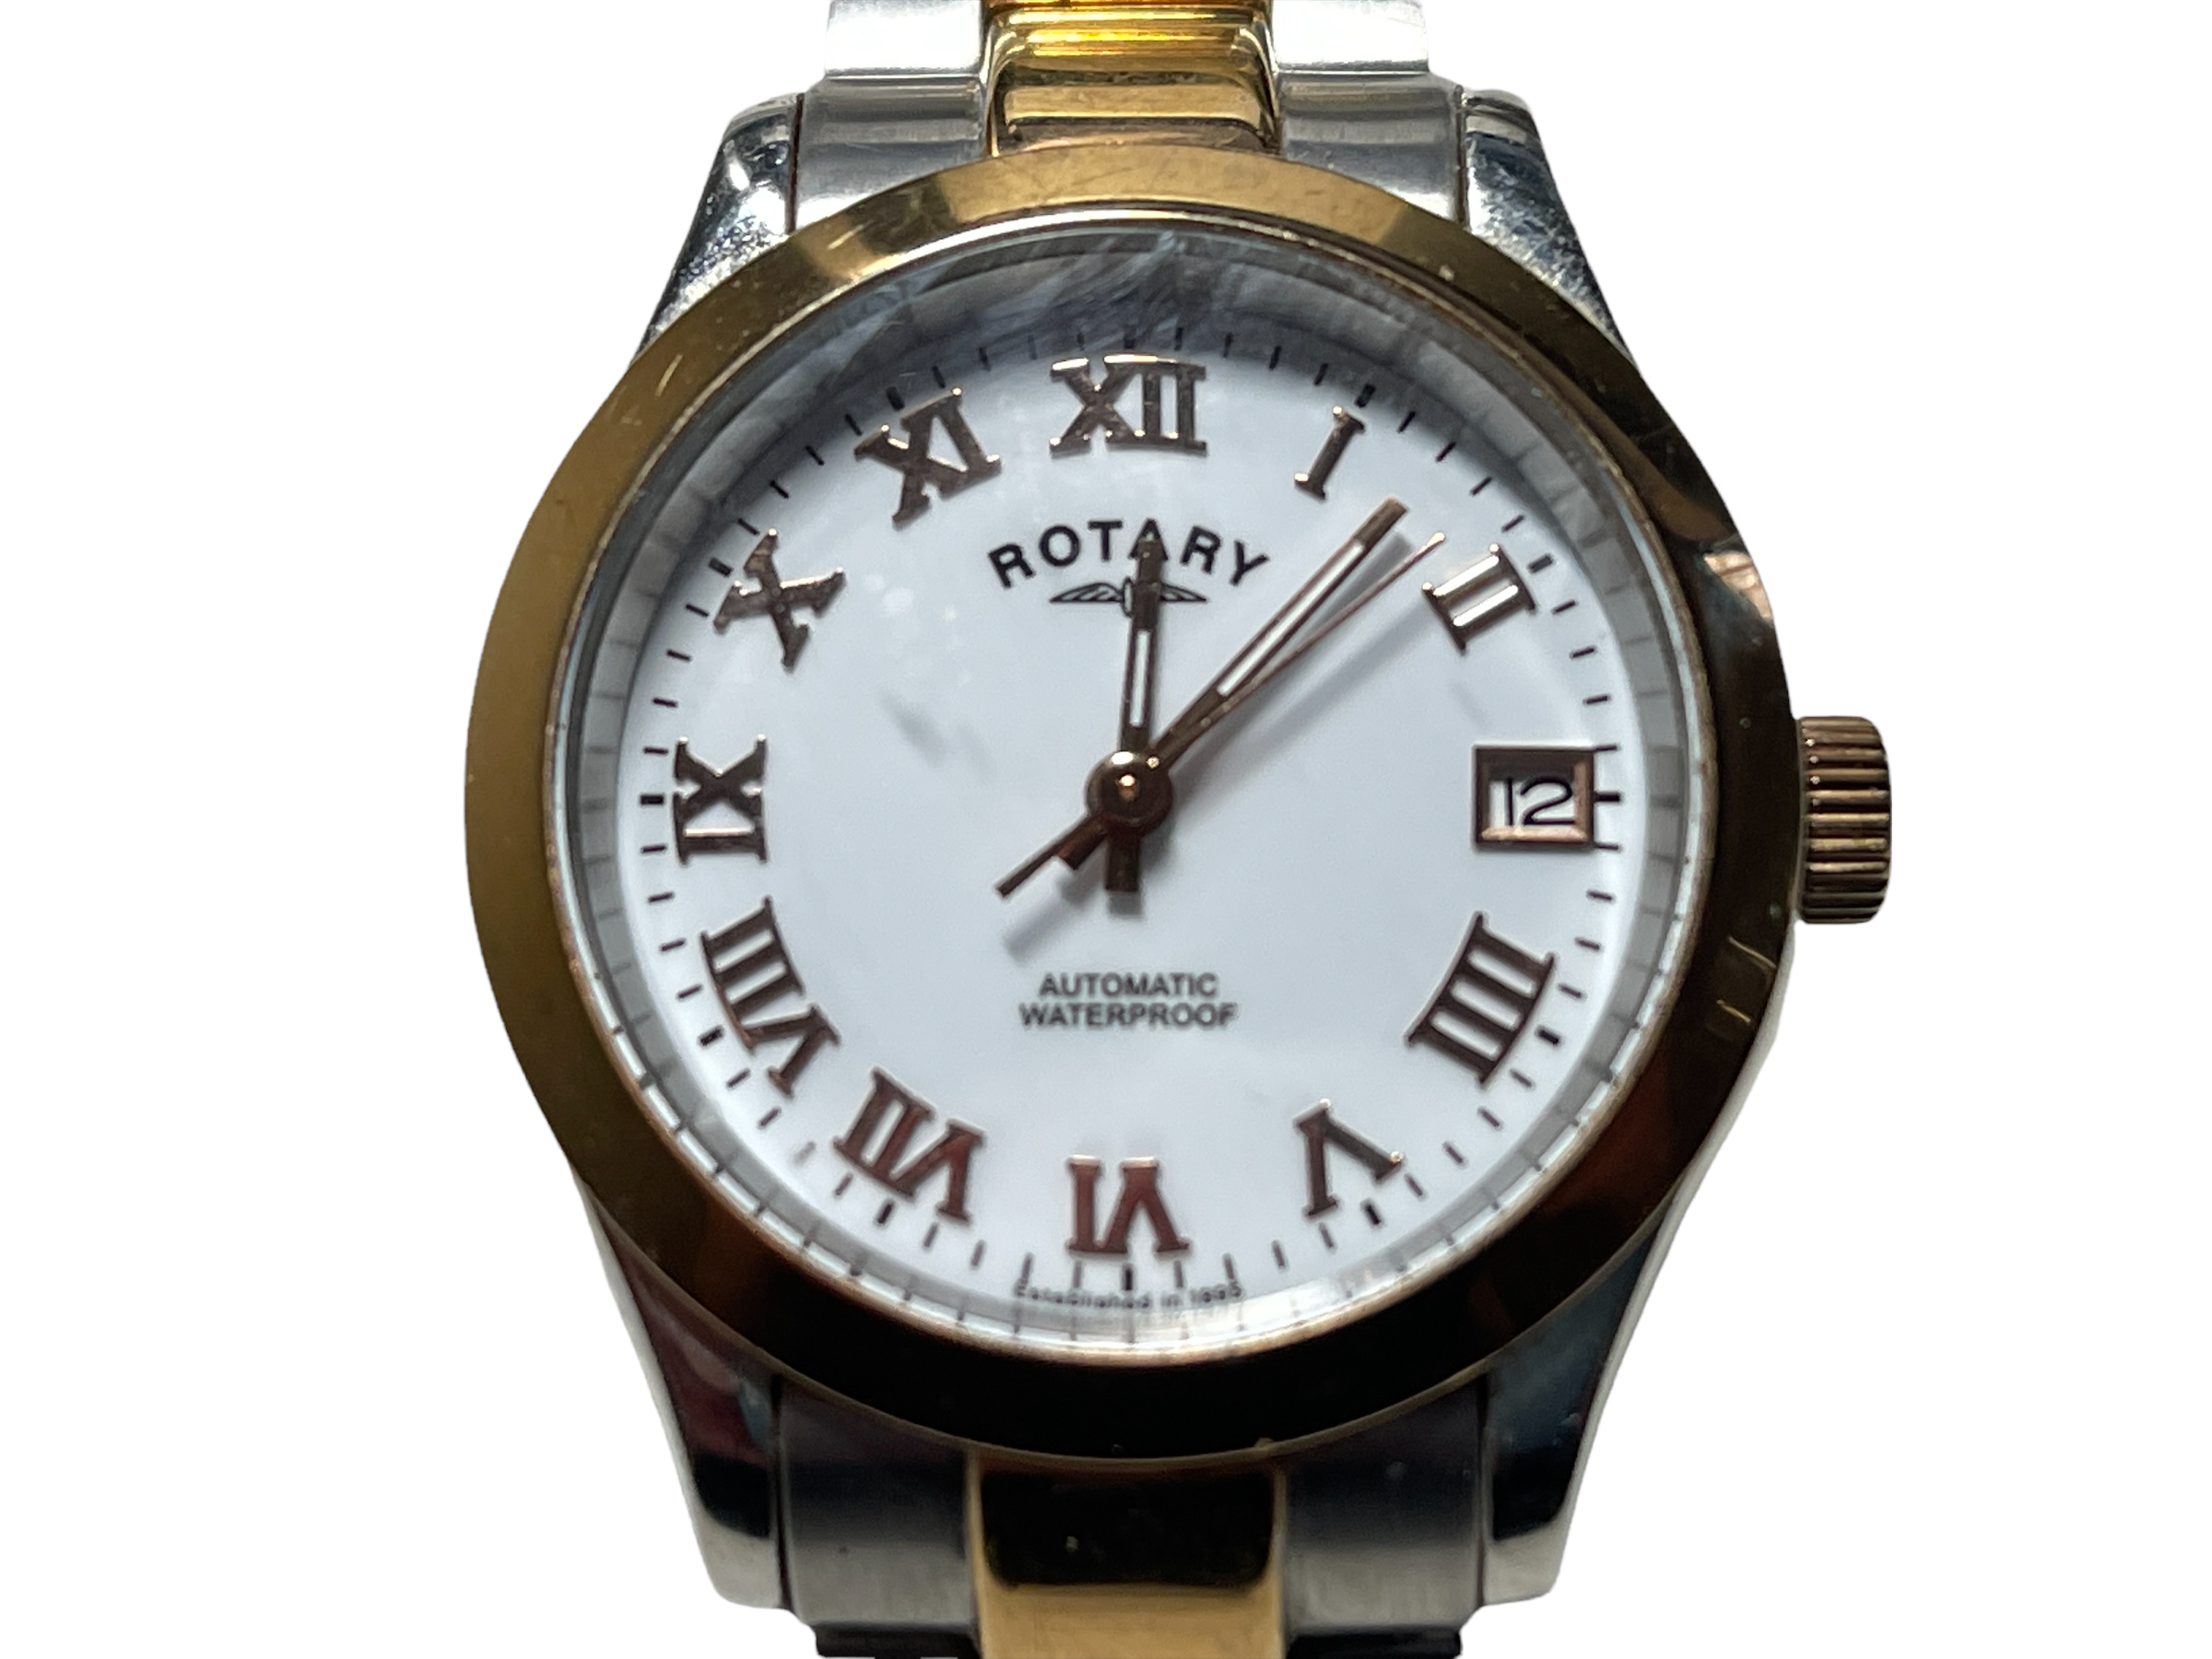 Returns or lost property from our private jet charter. Rotary ladies automatic watch - Image 2 of 8